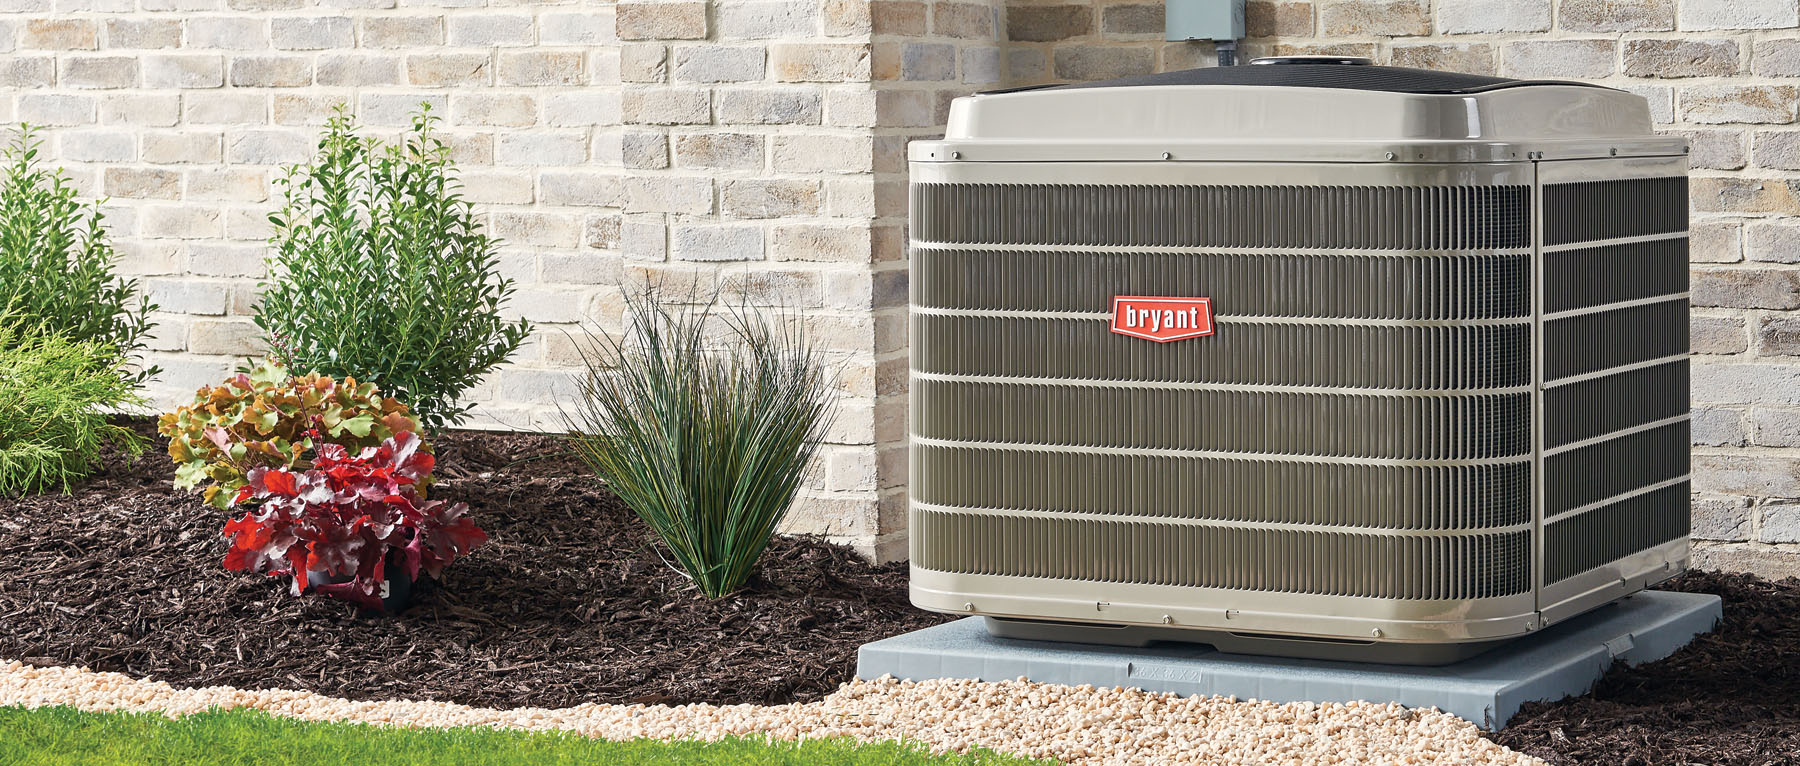 Gilley's Heating & Air Bryant Cooling System